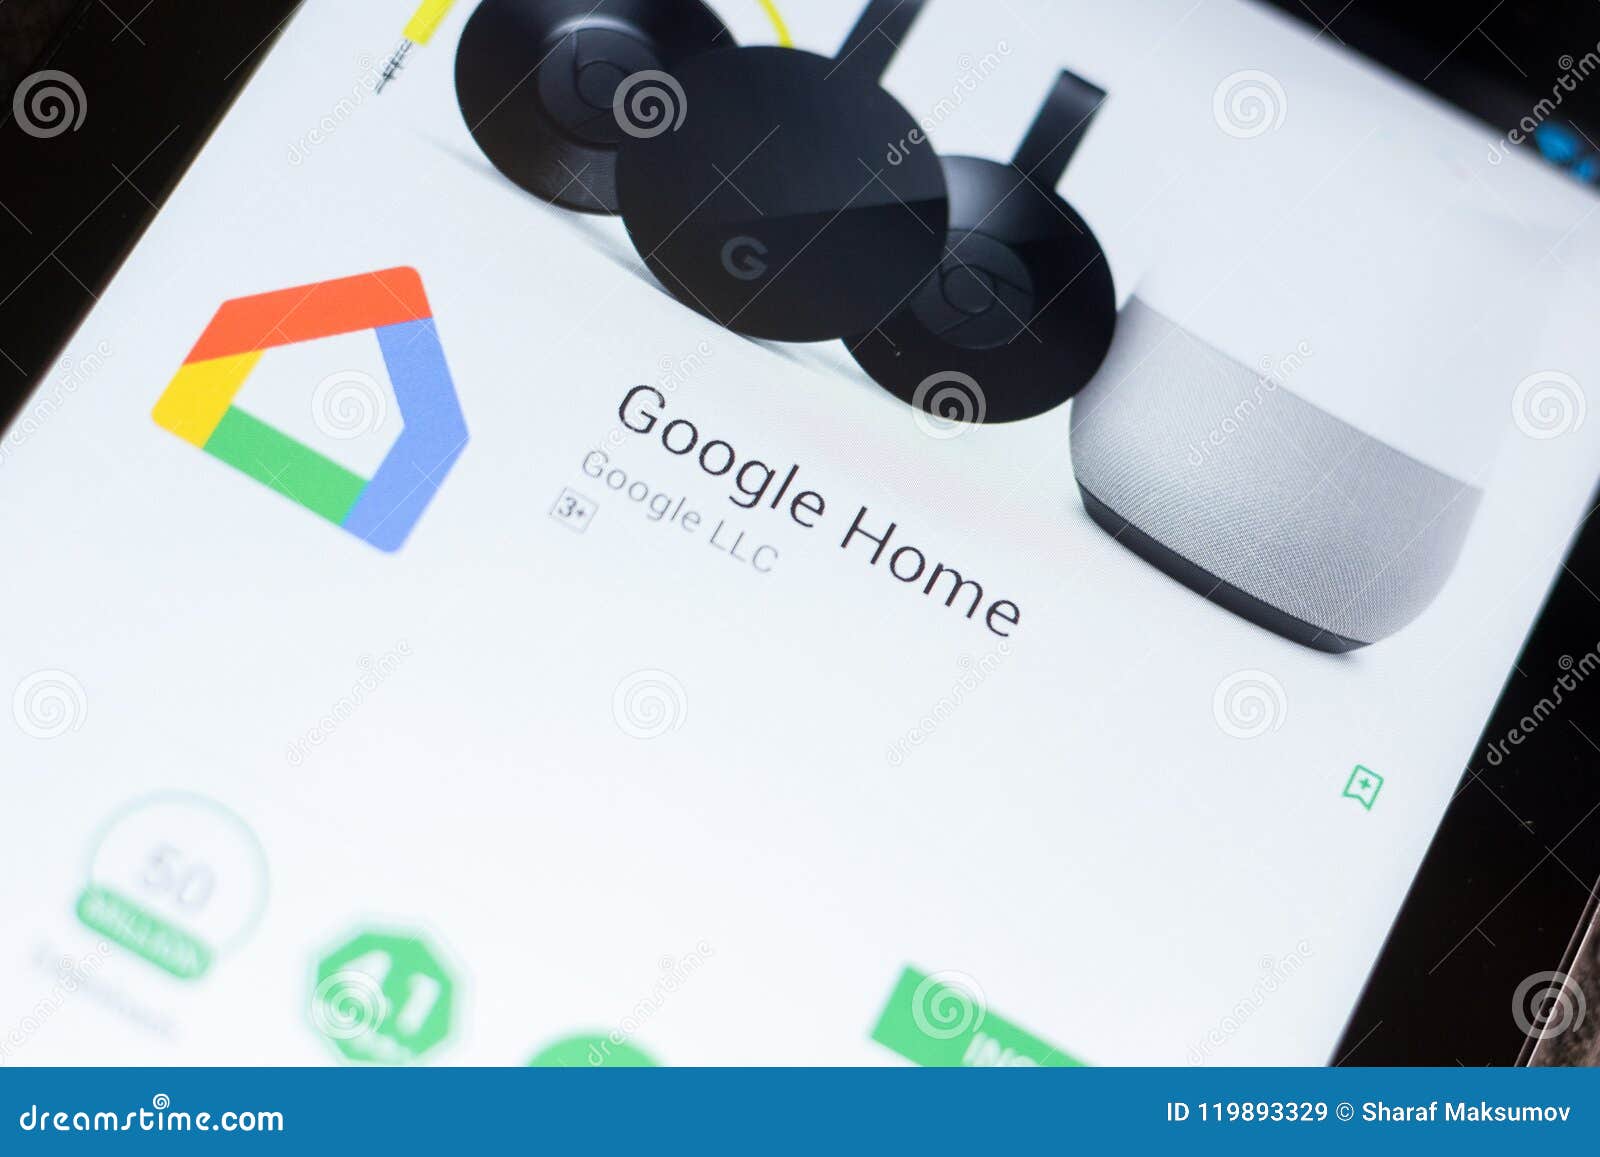 google home to pc